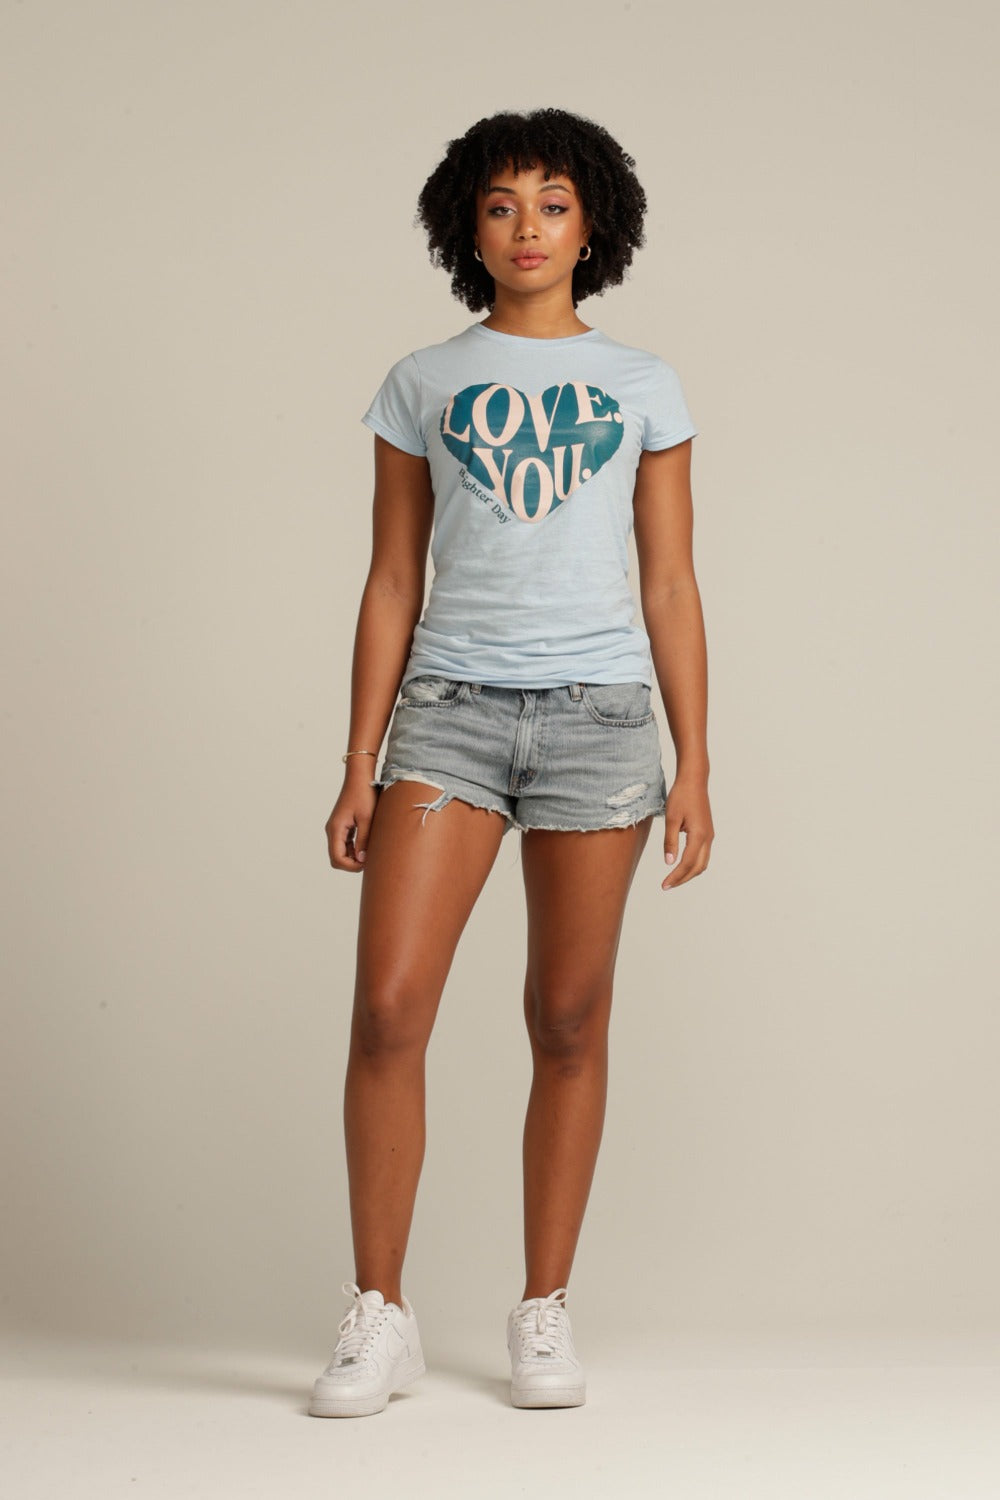 Curly haired woman wears blue LOVE YOU tee